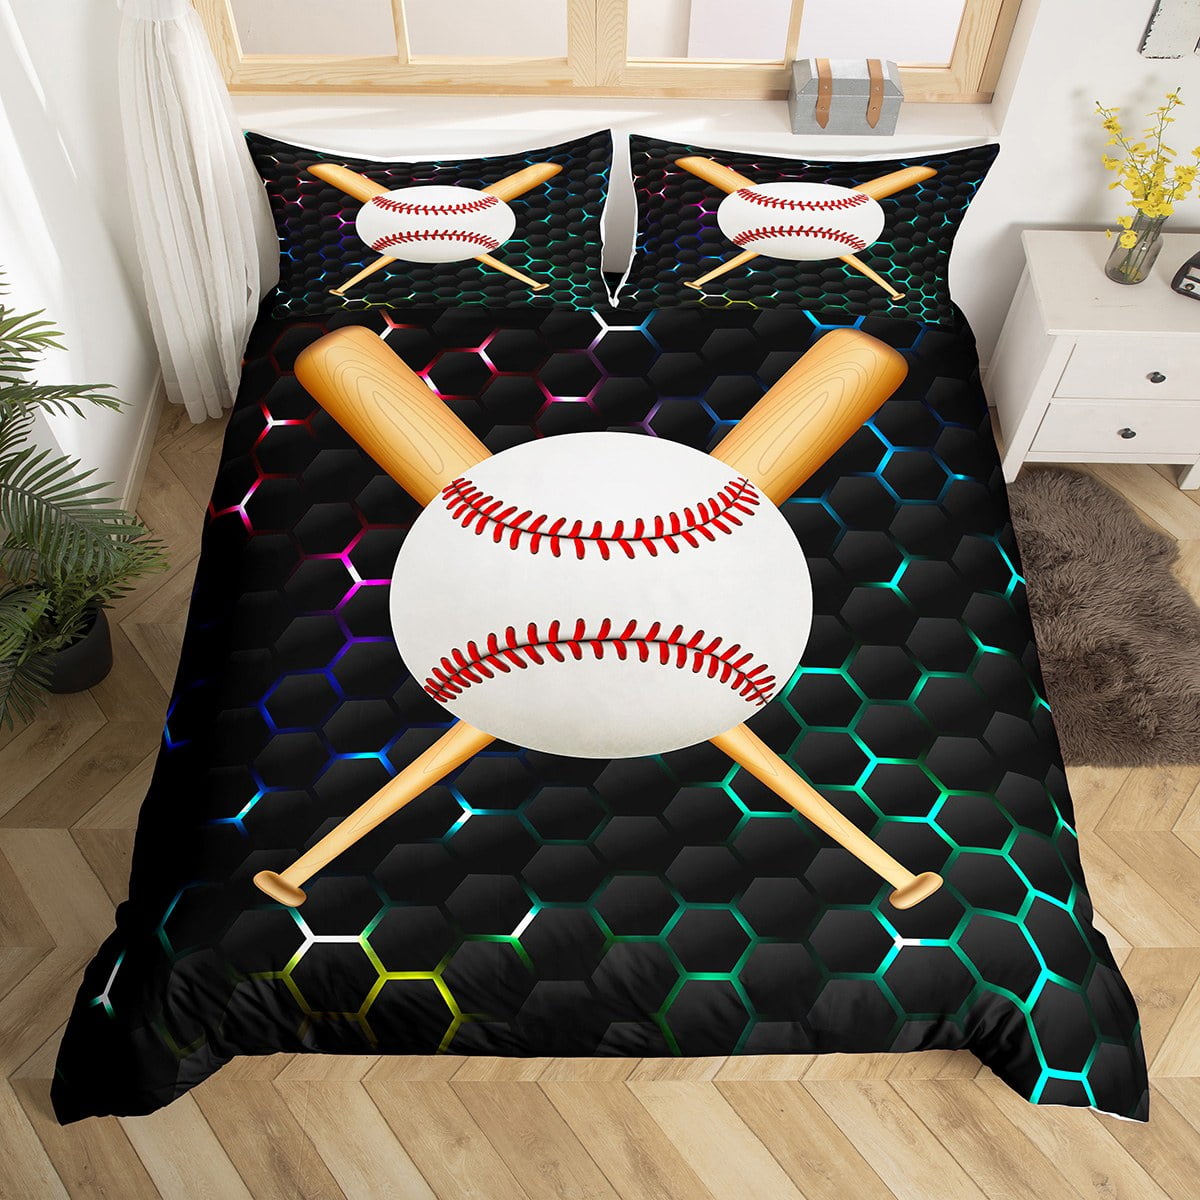 YST Kids Softball Bed Sets Queen Sport Bedding for Boys, Gradient